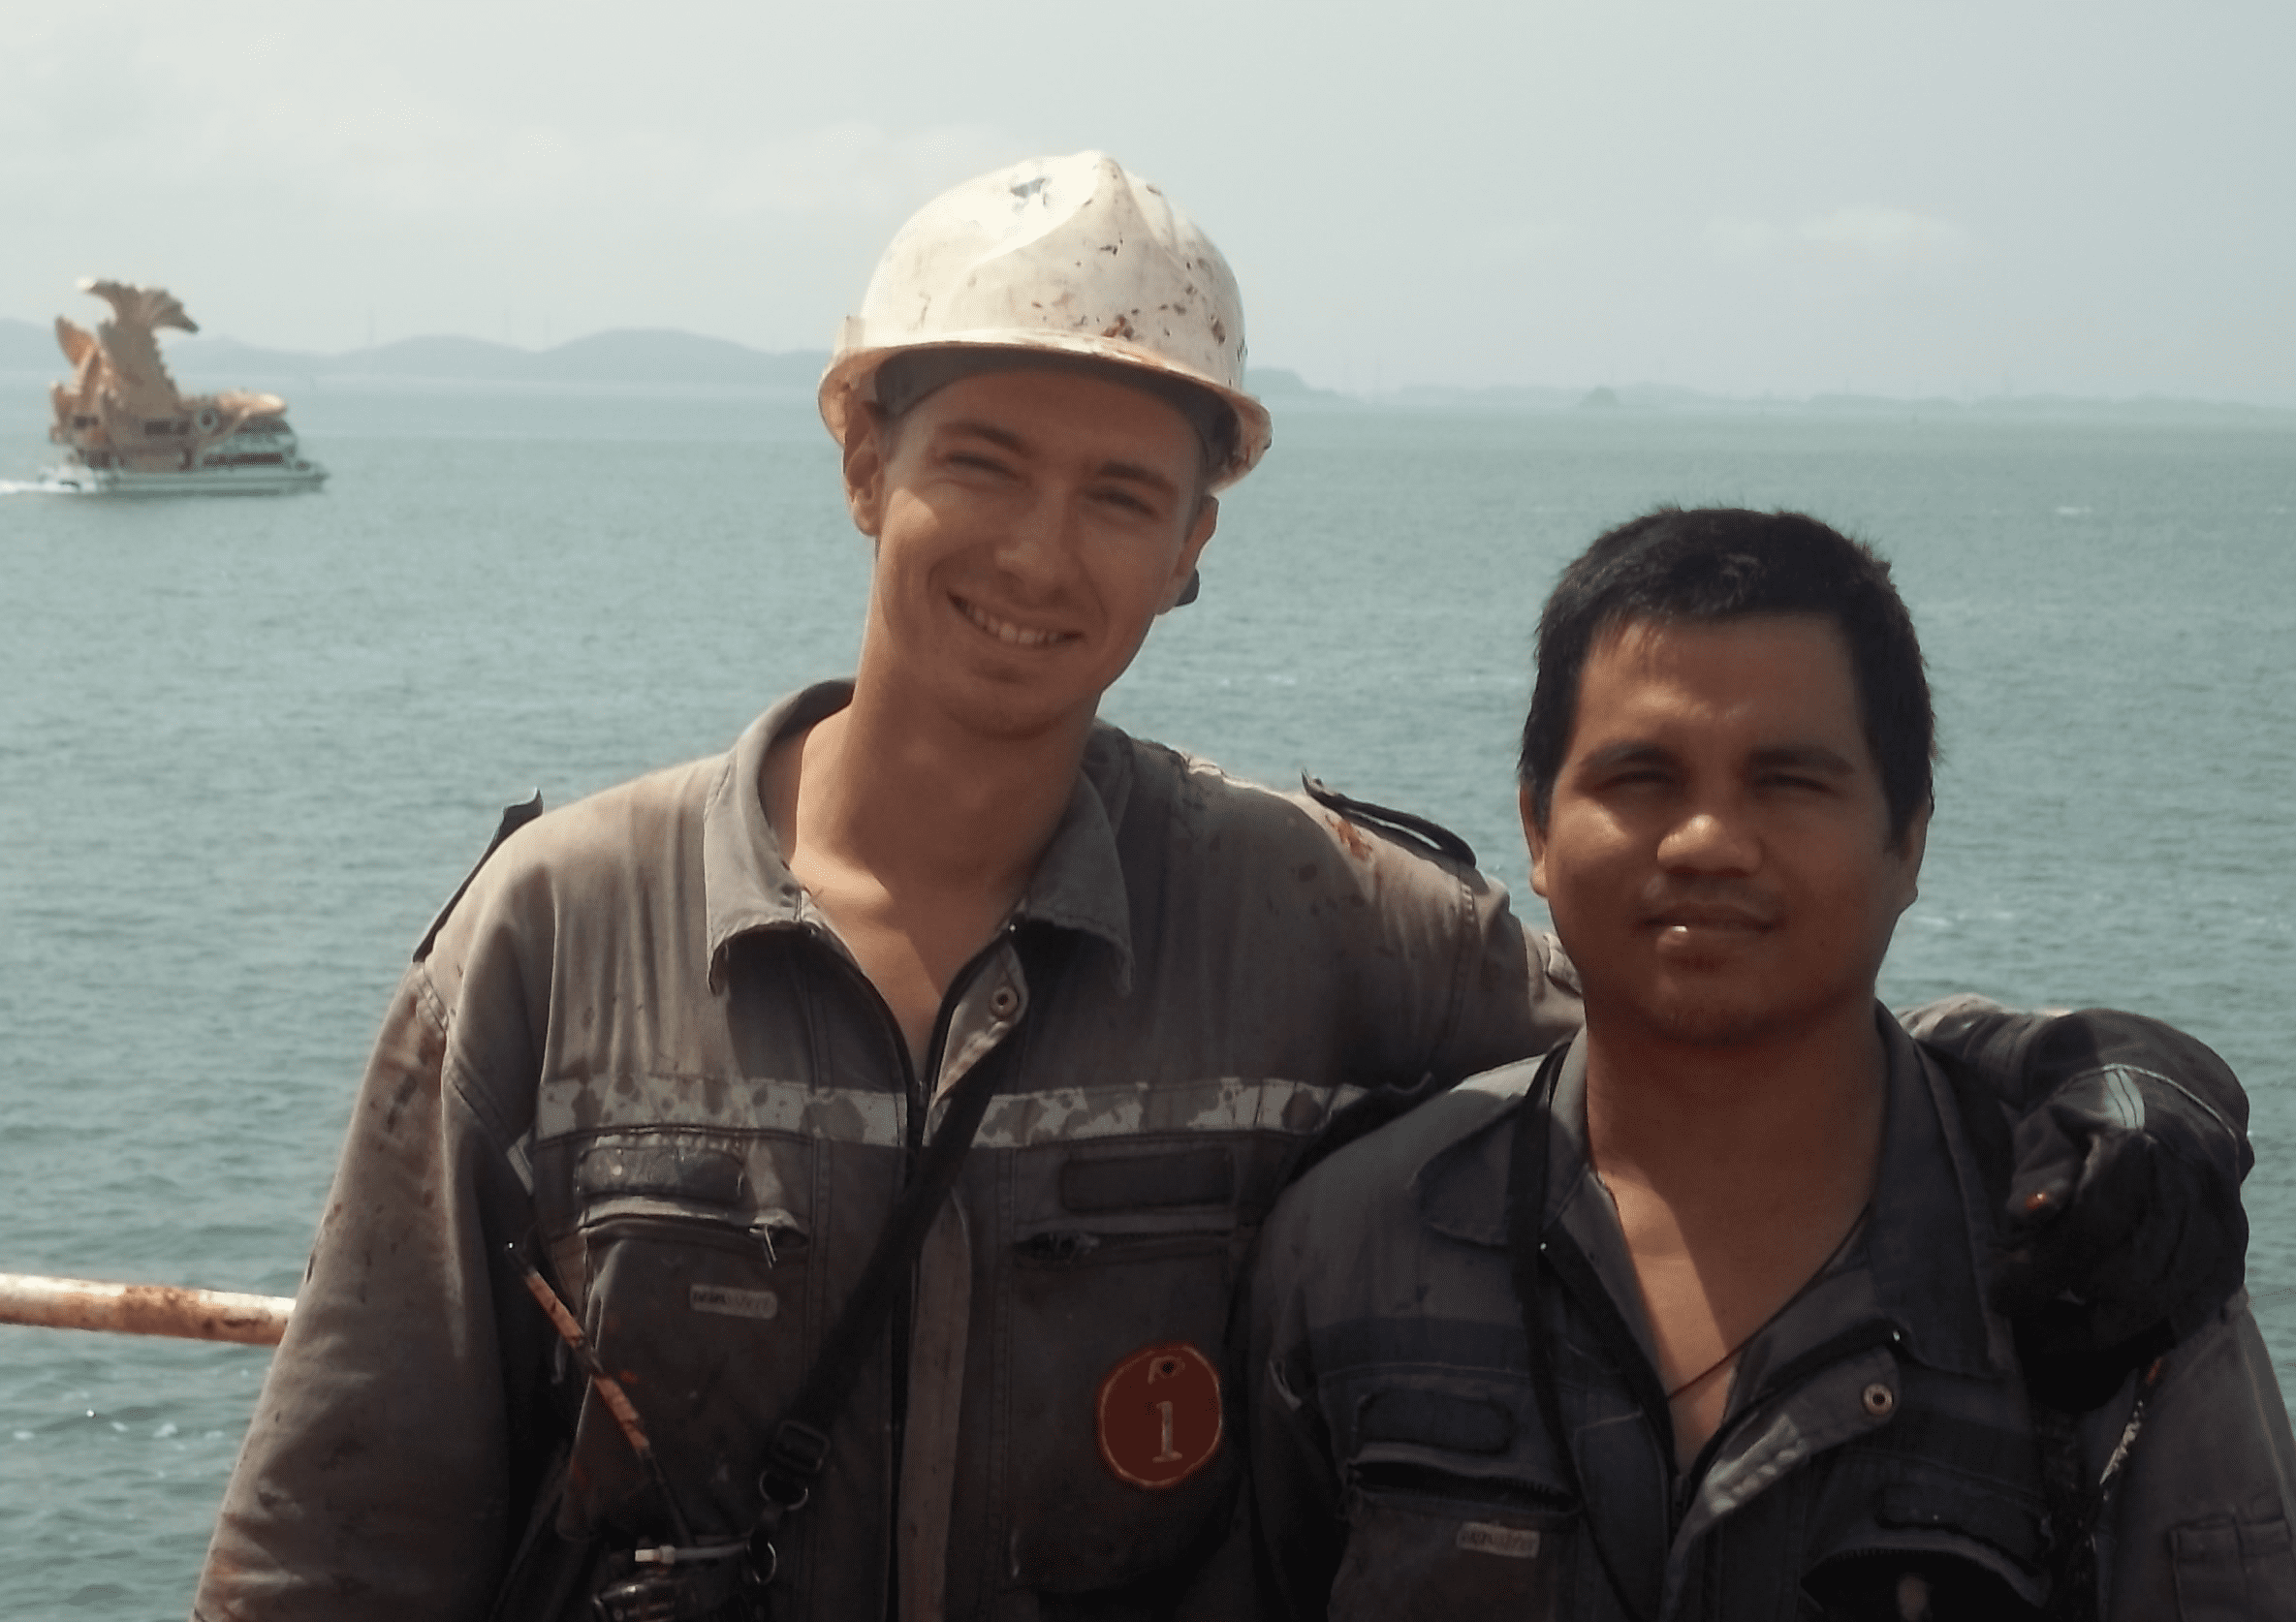 Two seamen in the middle of work day on the coast of Singapore